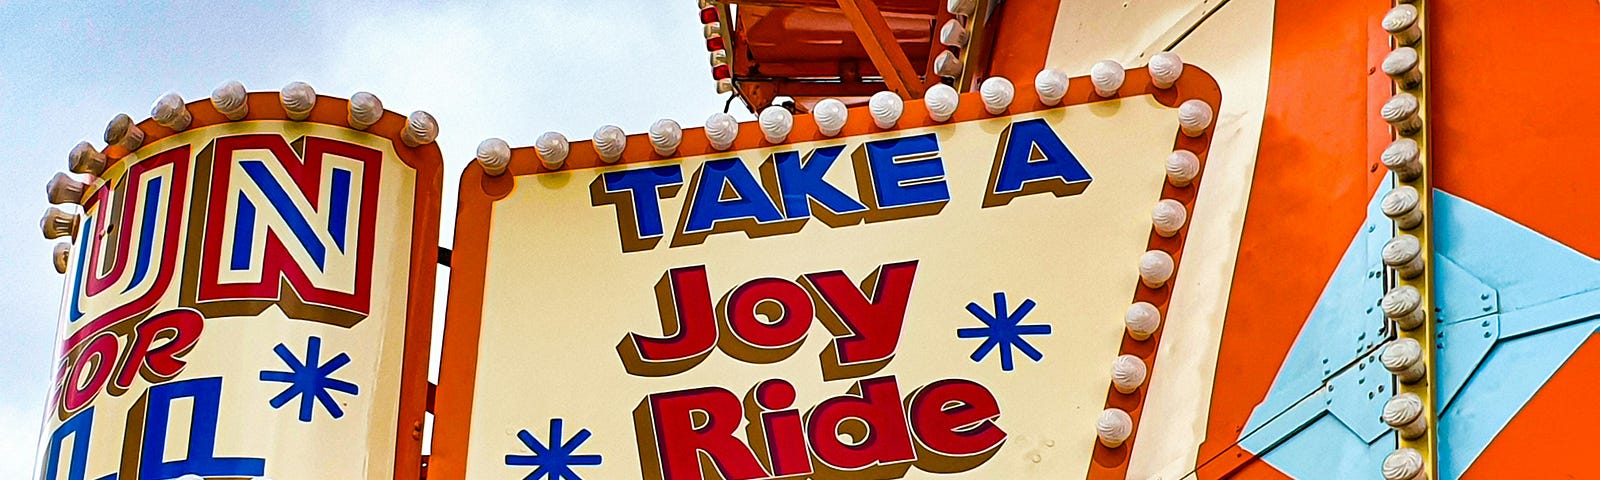 Sign on an amusement park that says “Take A Joy ride.”